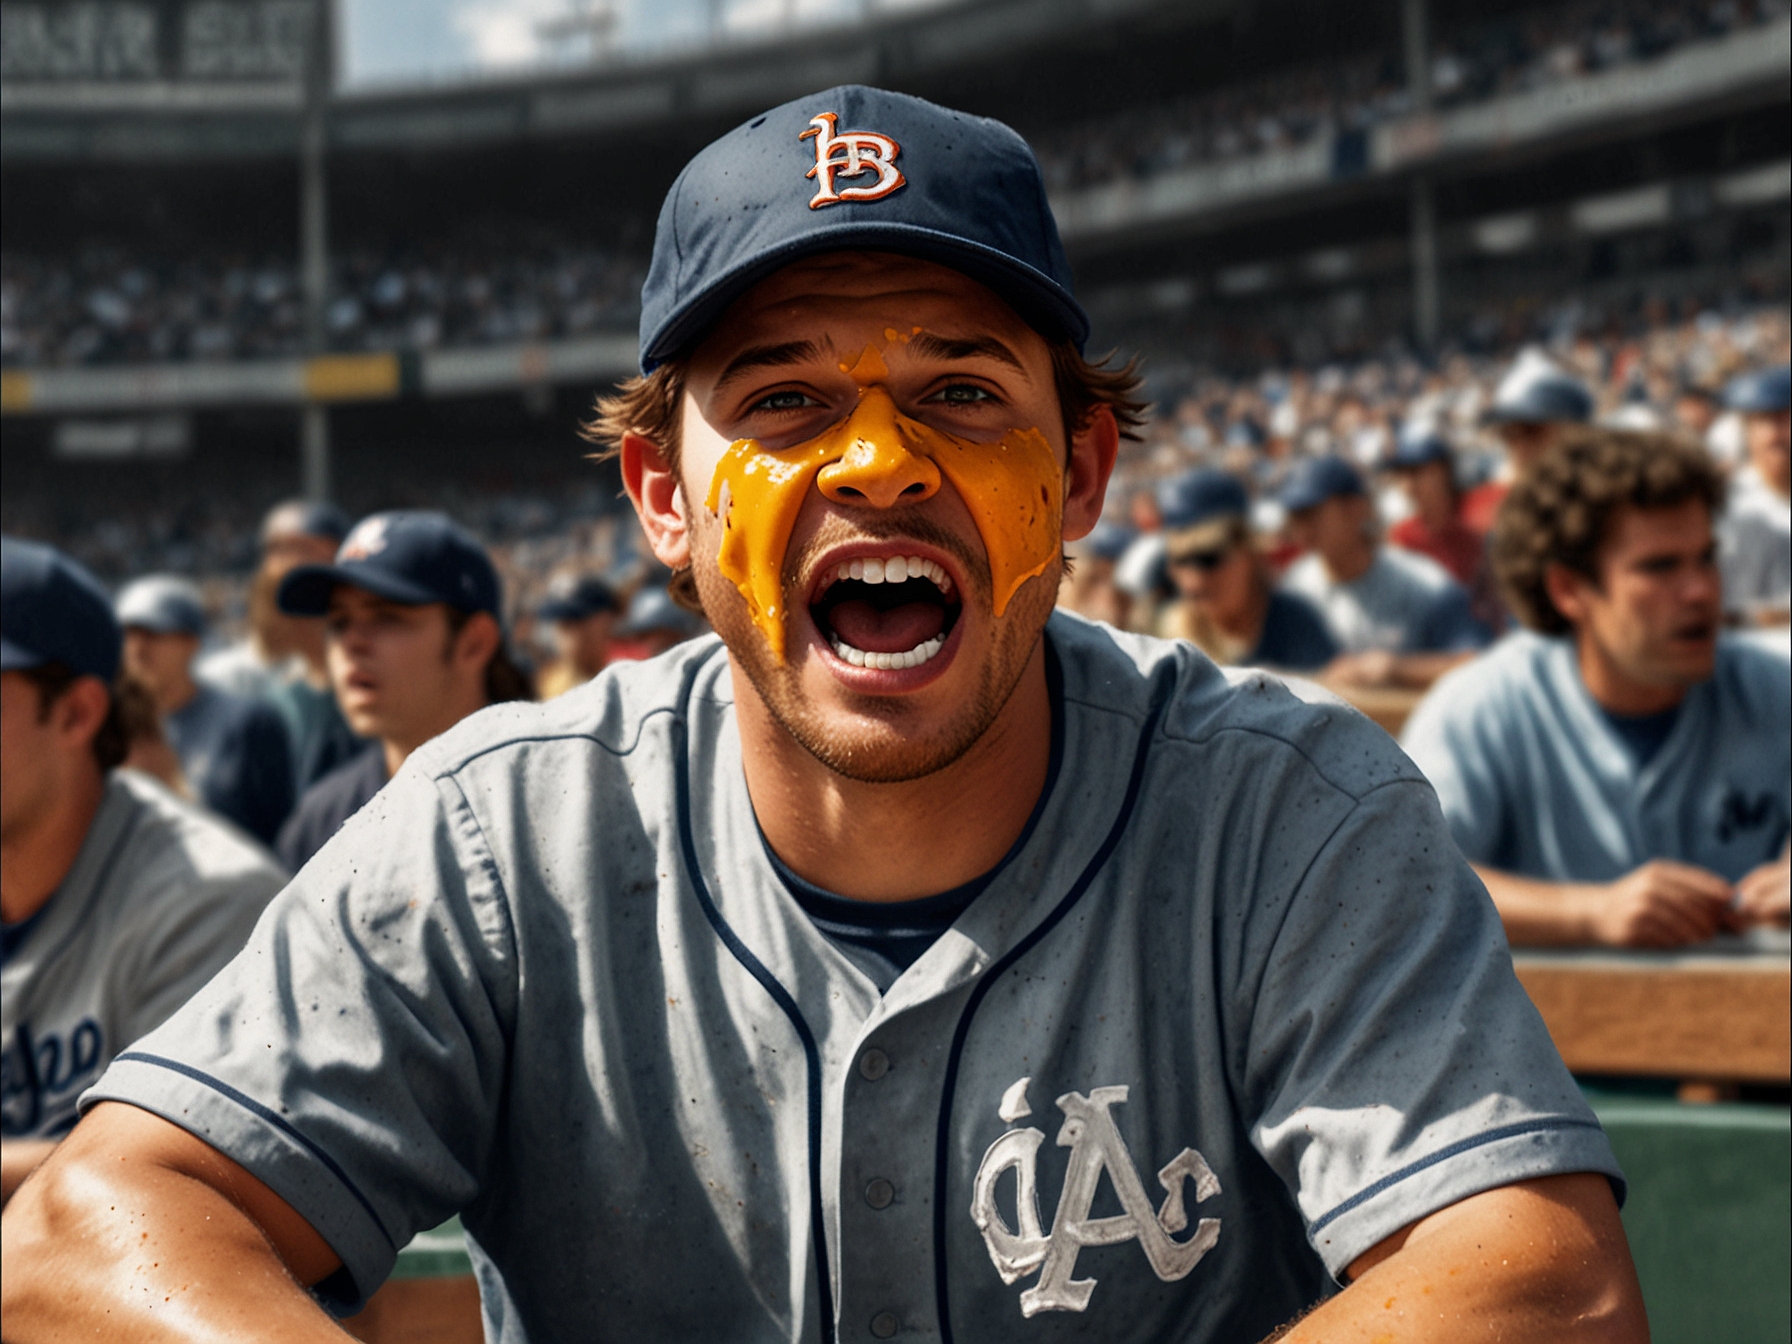 A distressed fan with nacho cheese smeared on their face amid a brawl in the stands at an MLB game, capturing the intensity and unexpected turn of events.